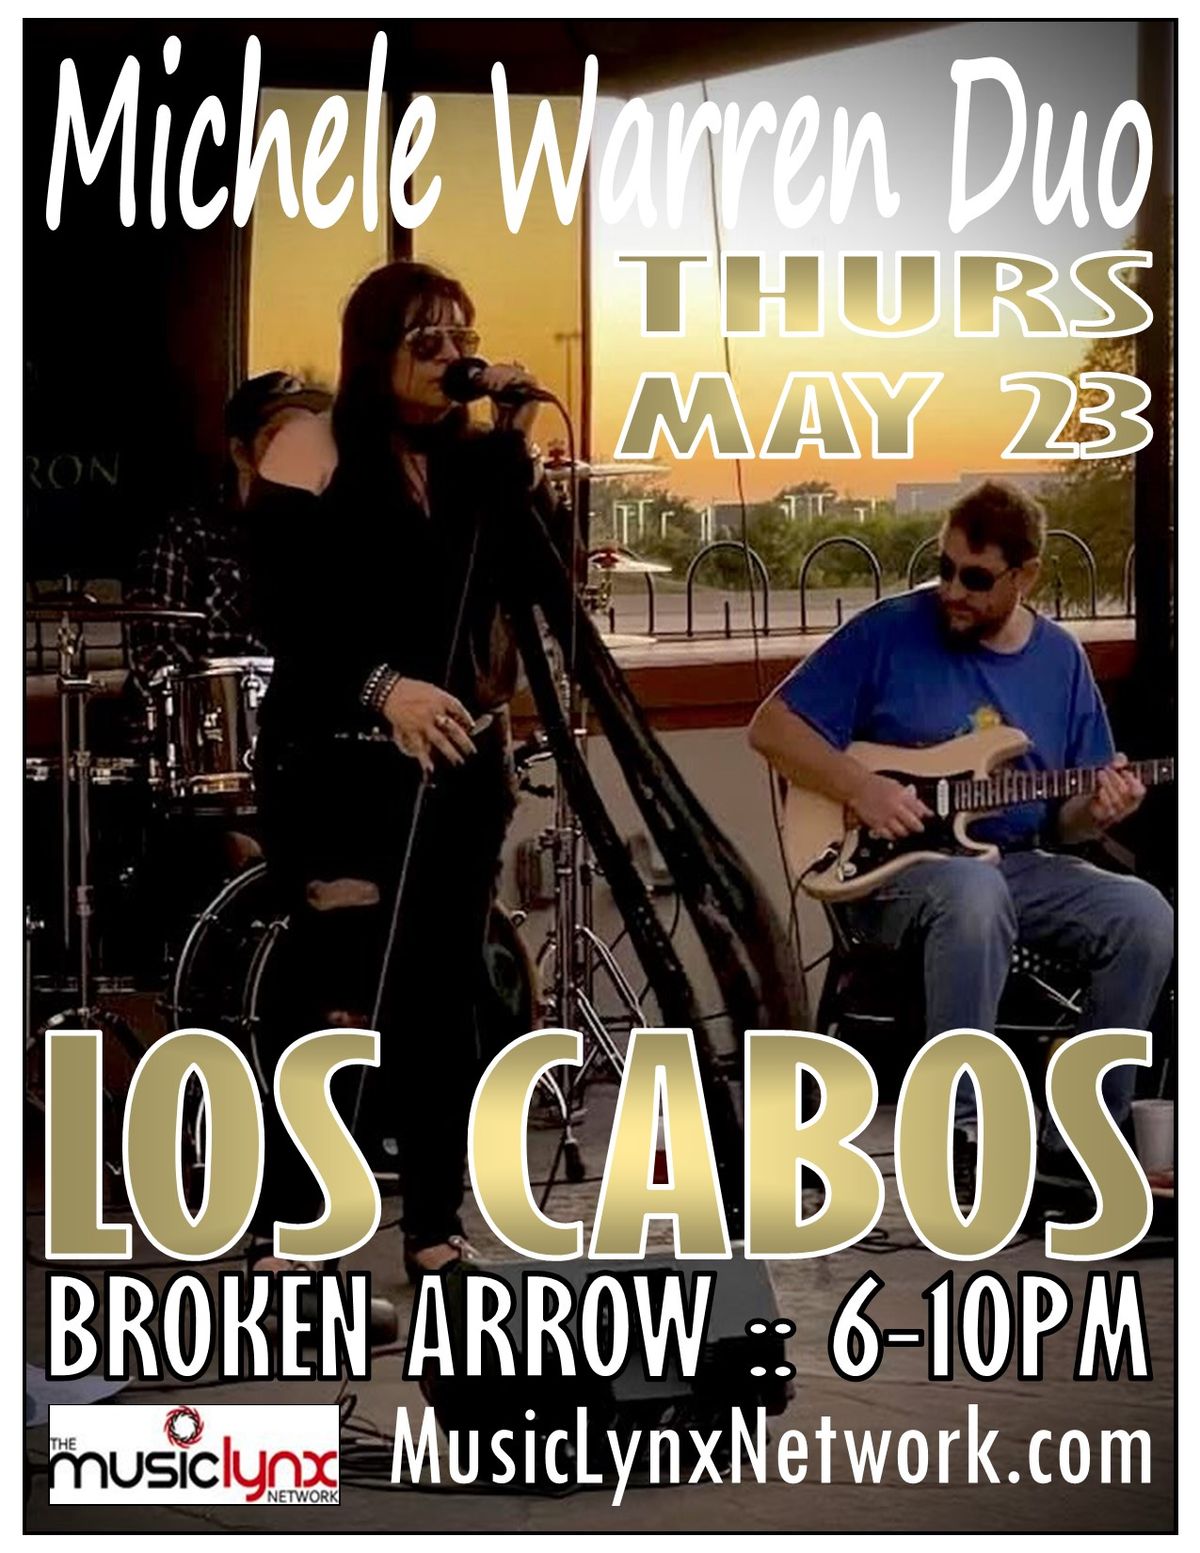 MICHELE WARREN DUO Thursday at Los Cabos BA